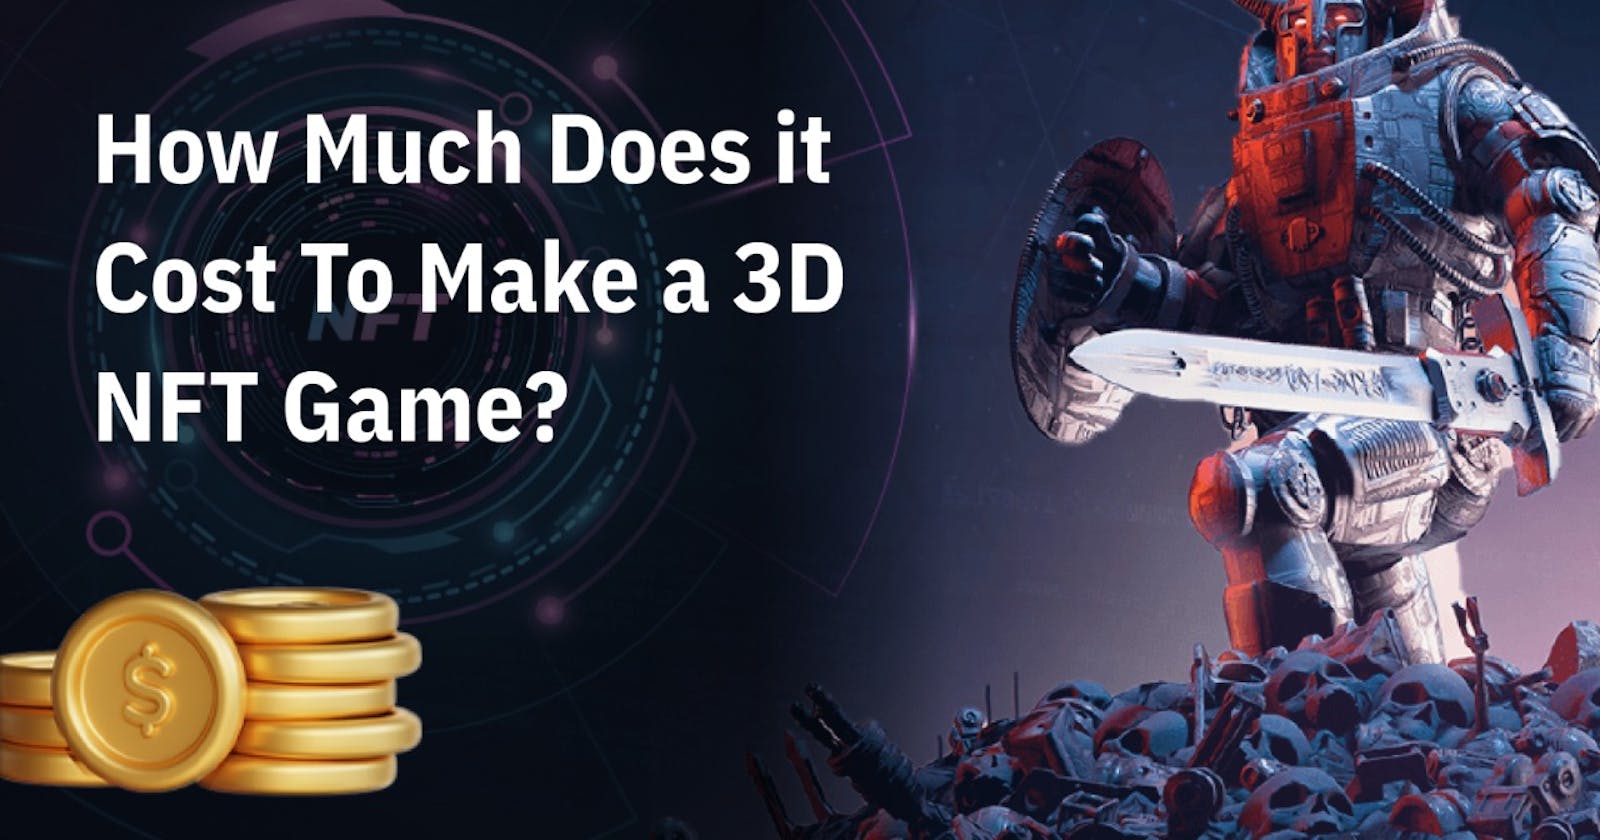 How Much Does it Cost To Make a 3D NFT Game?